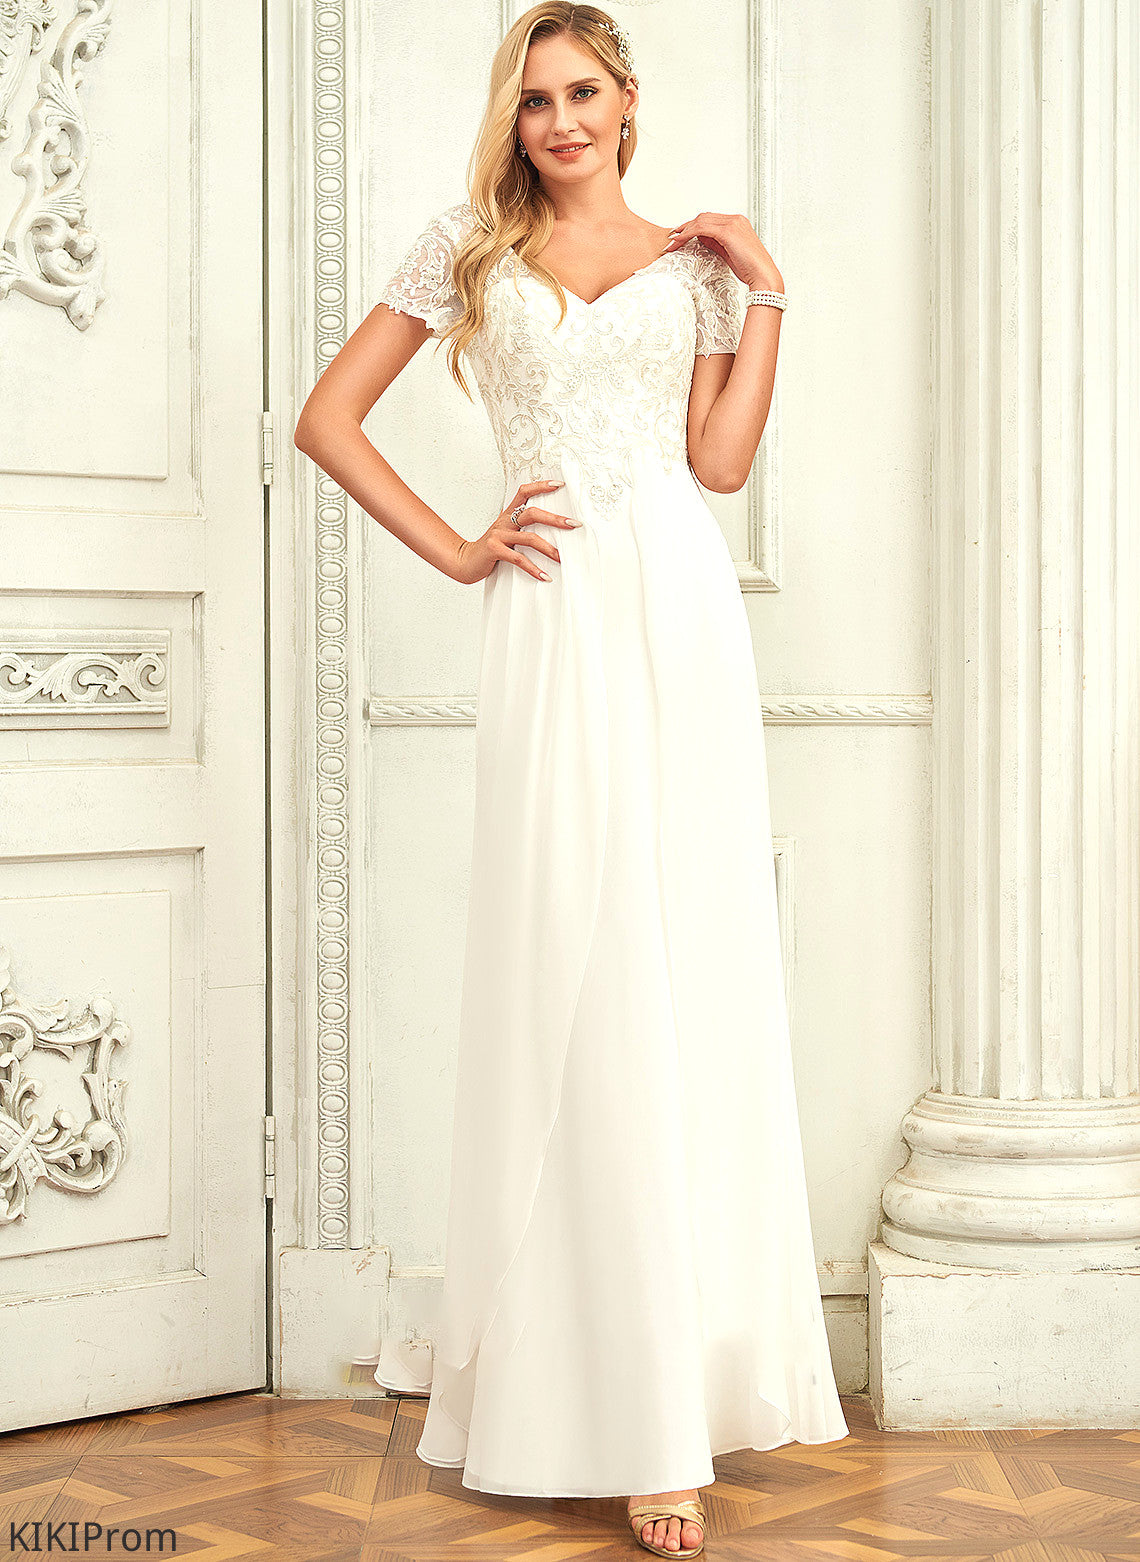 Wedding Dress With Lace A-Line Floor-Length Chiffon Erica Wedding Dresses Lace V-neck